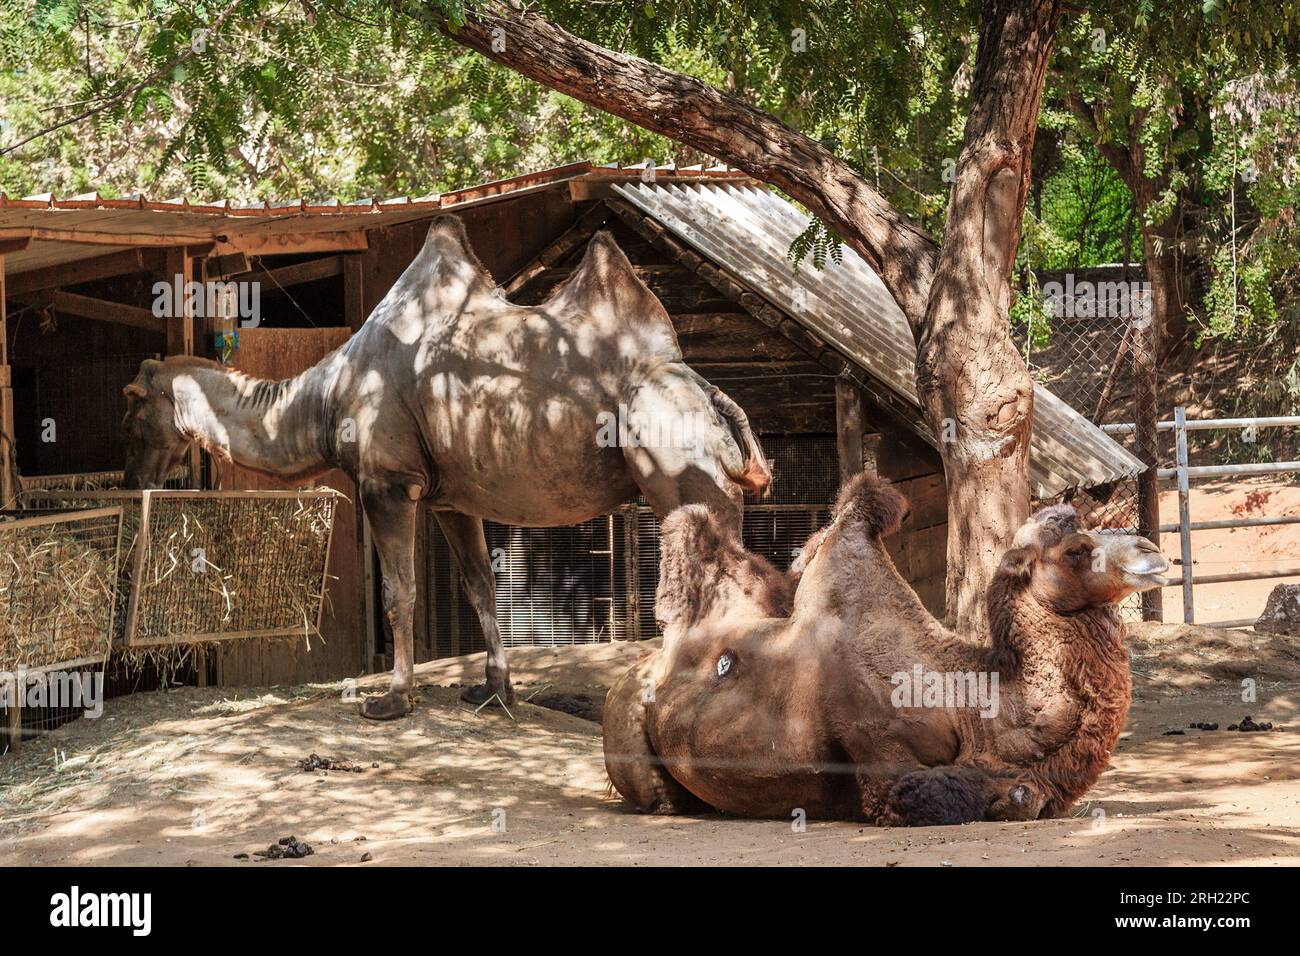 RAMAT GAN, ISRAEL - SEPTEMBER 25, 2017: hese are a bactrian camels in a special corral in a safari park. Stock Photo